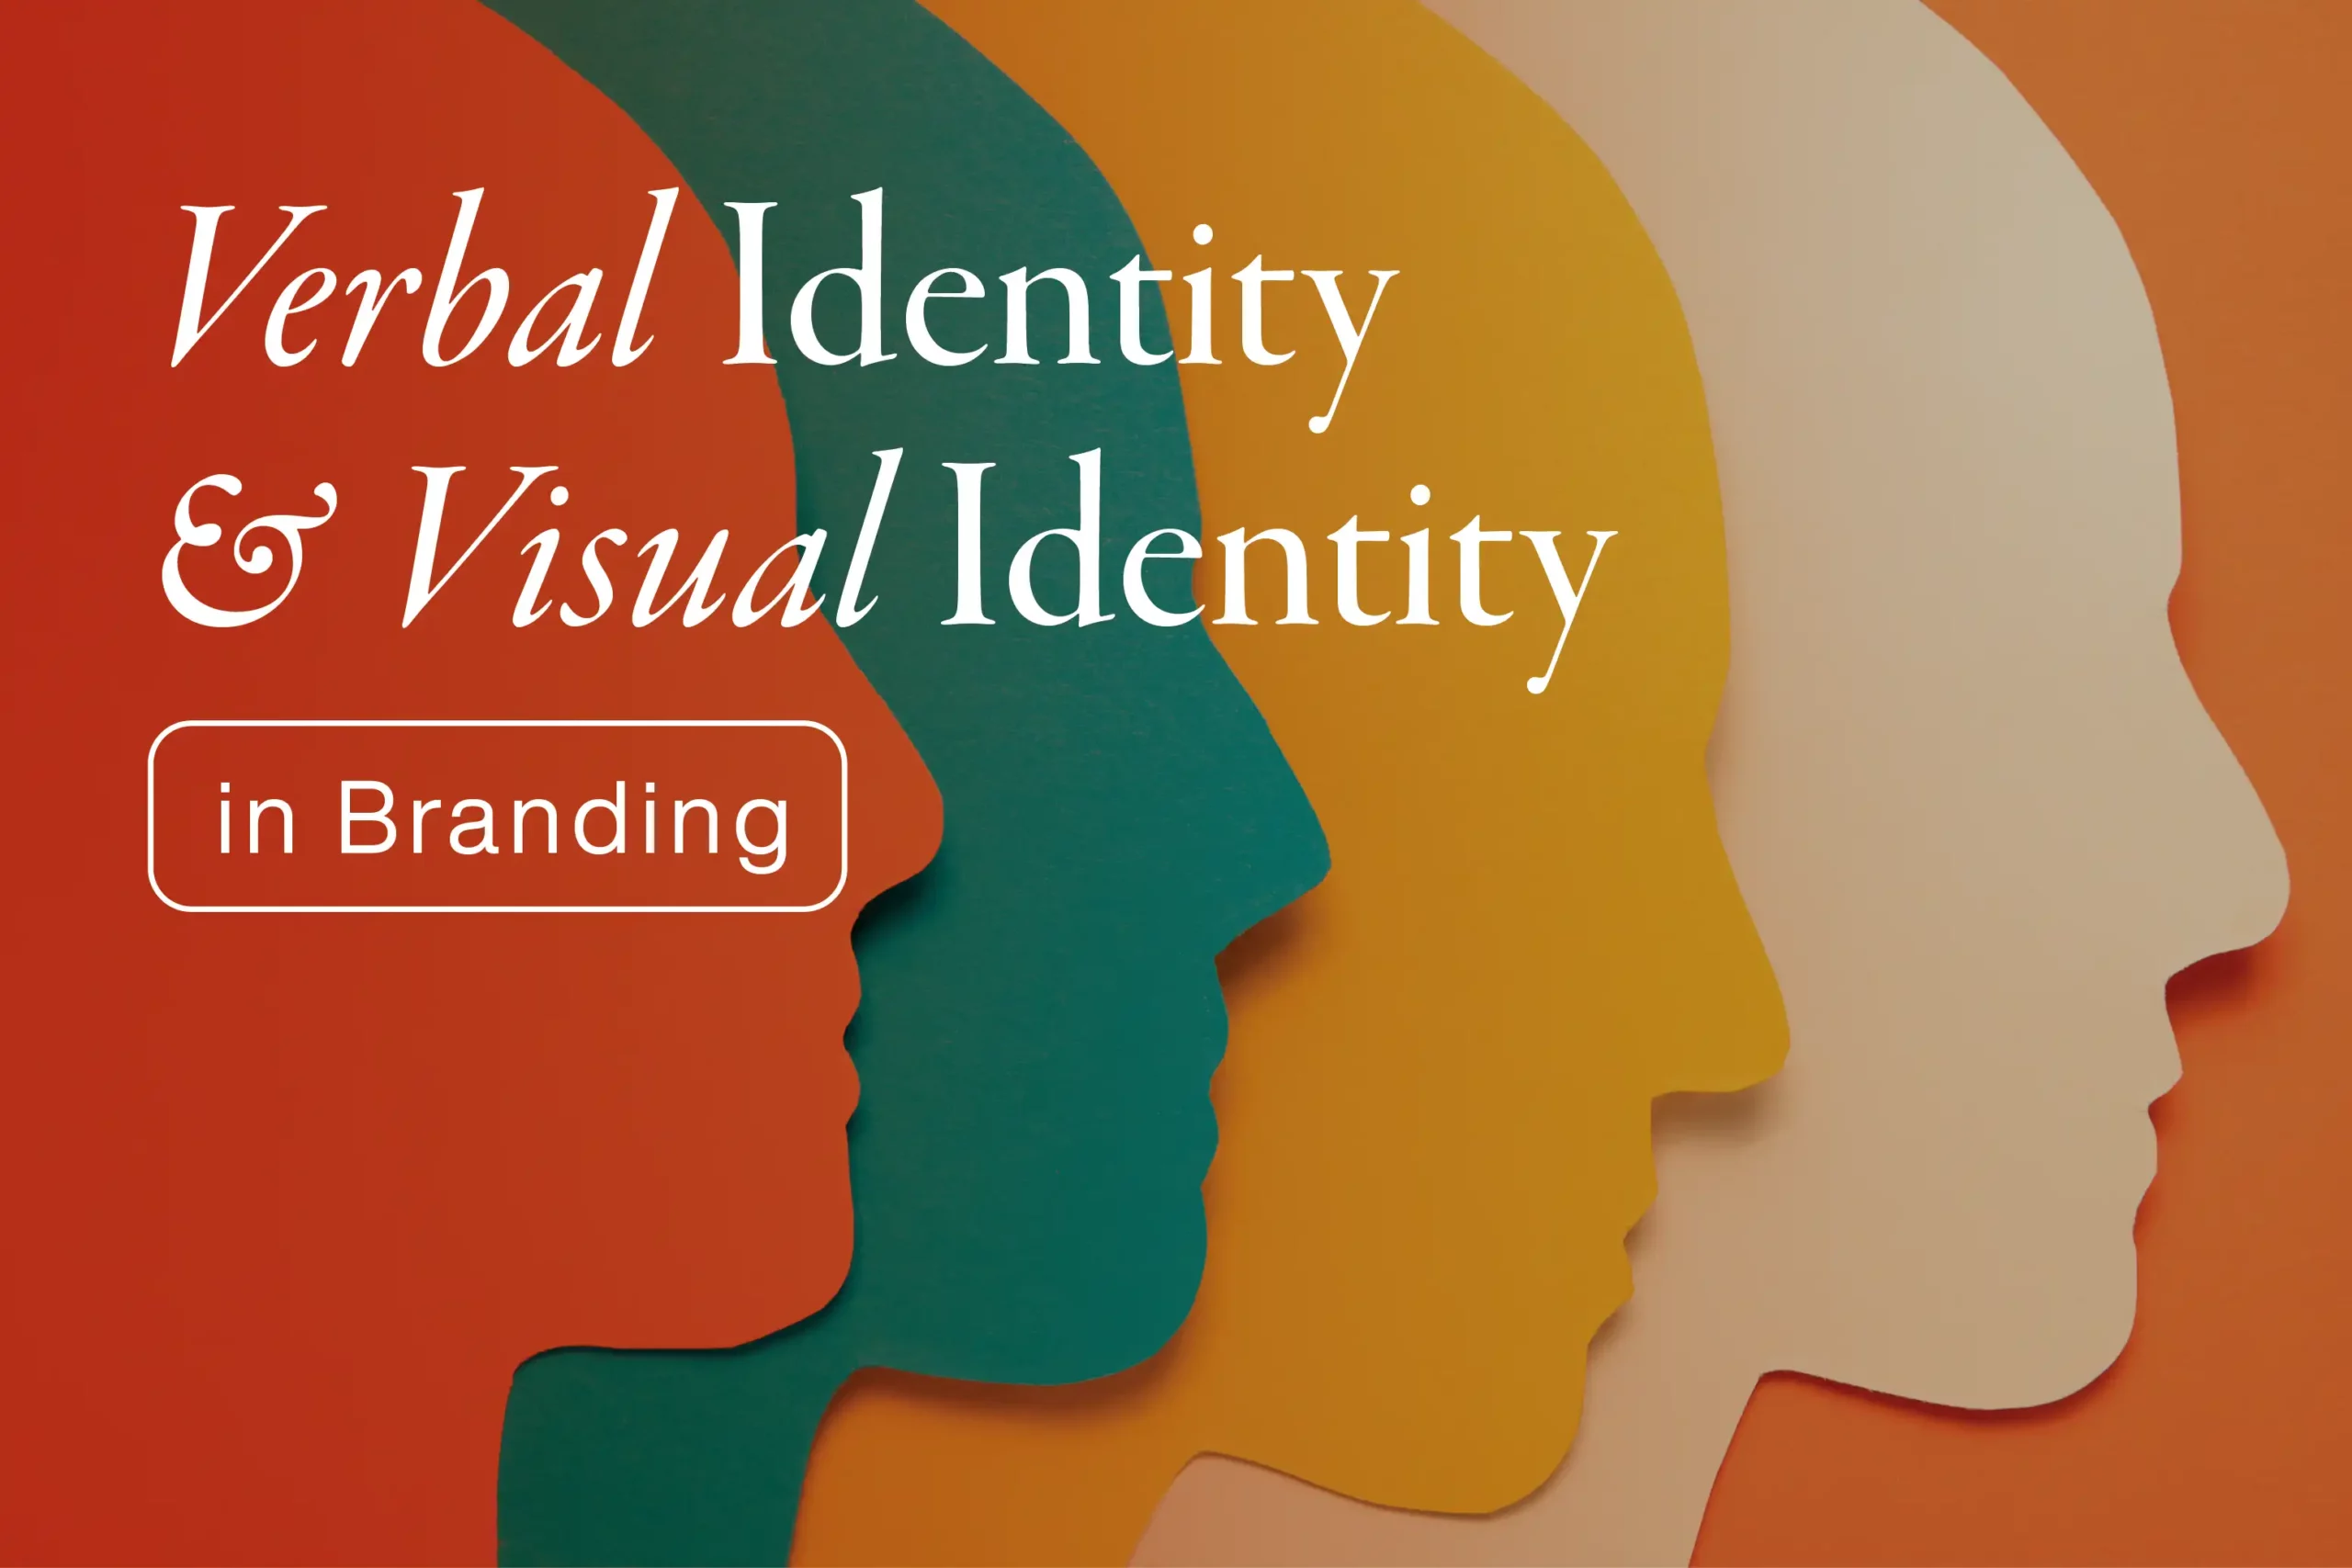 Visual Identity and Verbal Identity in Branding